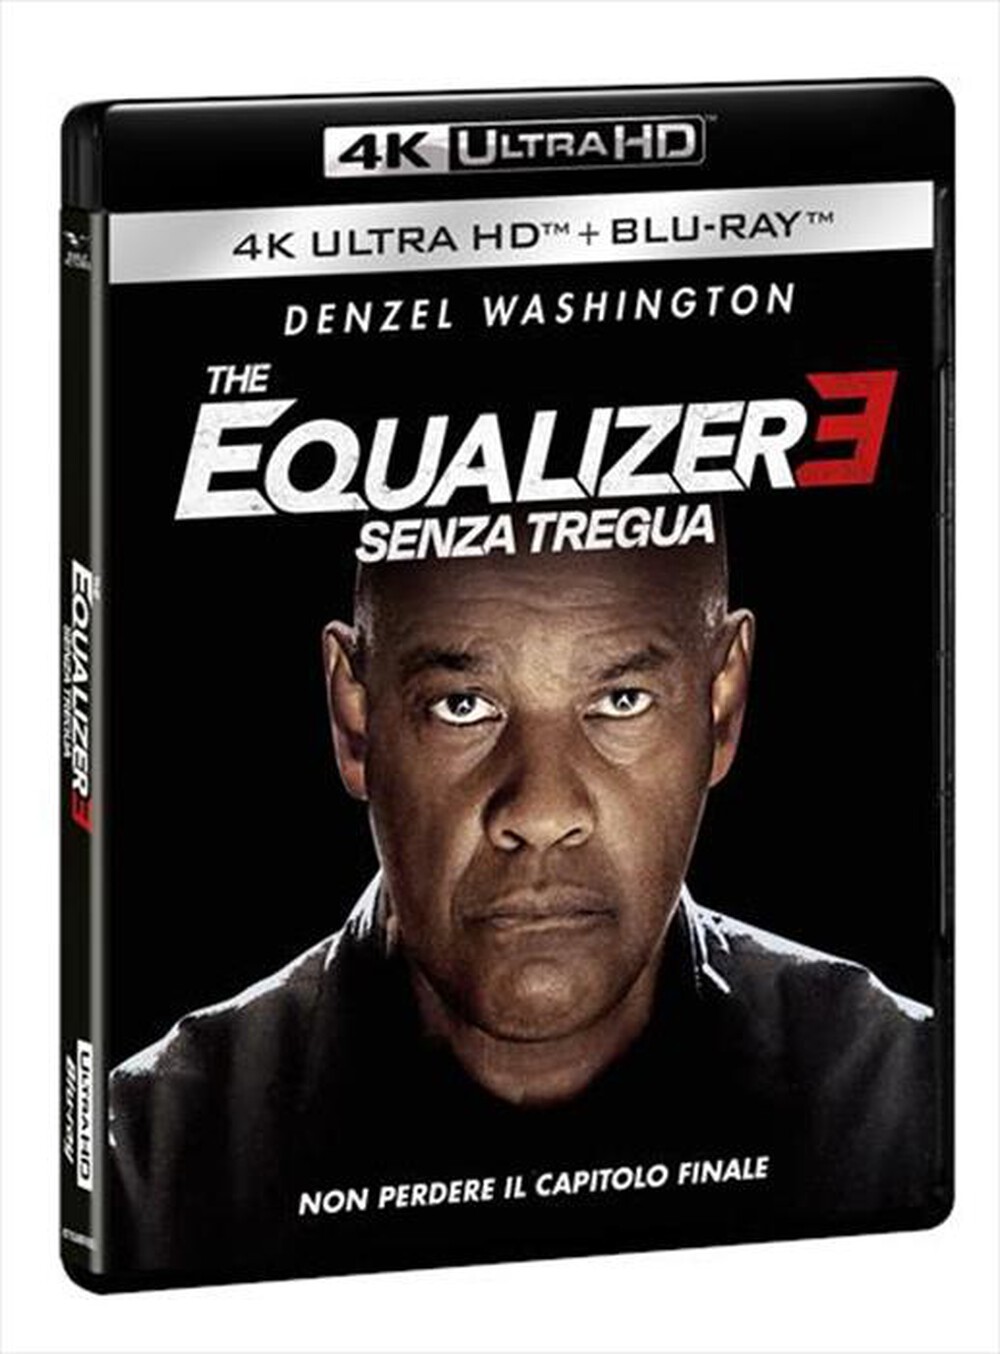 "SONY PICTURES - BRD4K THE EQUALIZER 3 -"